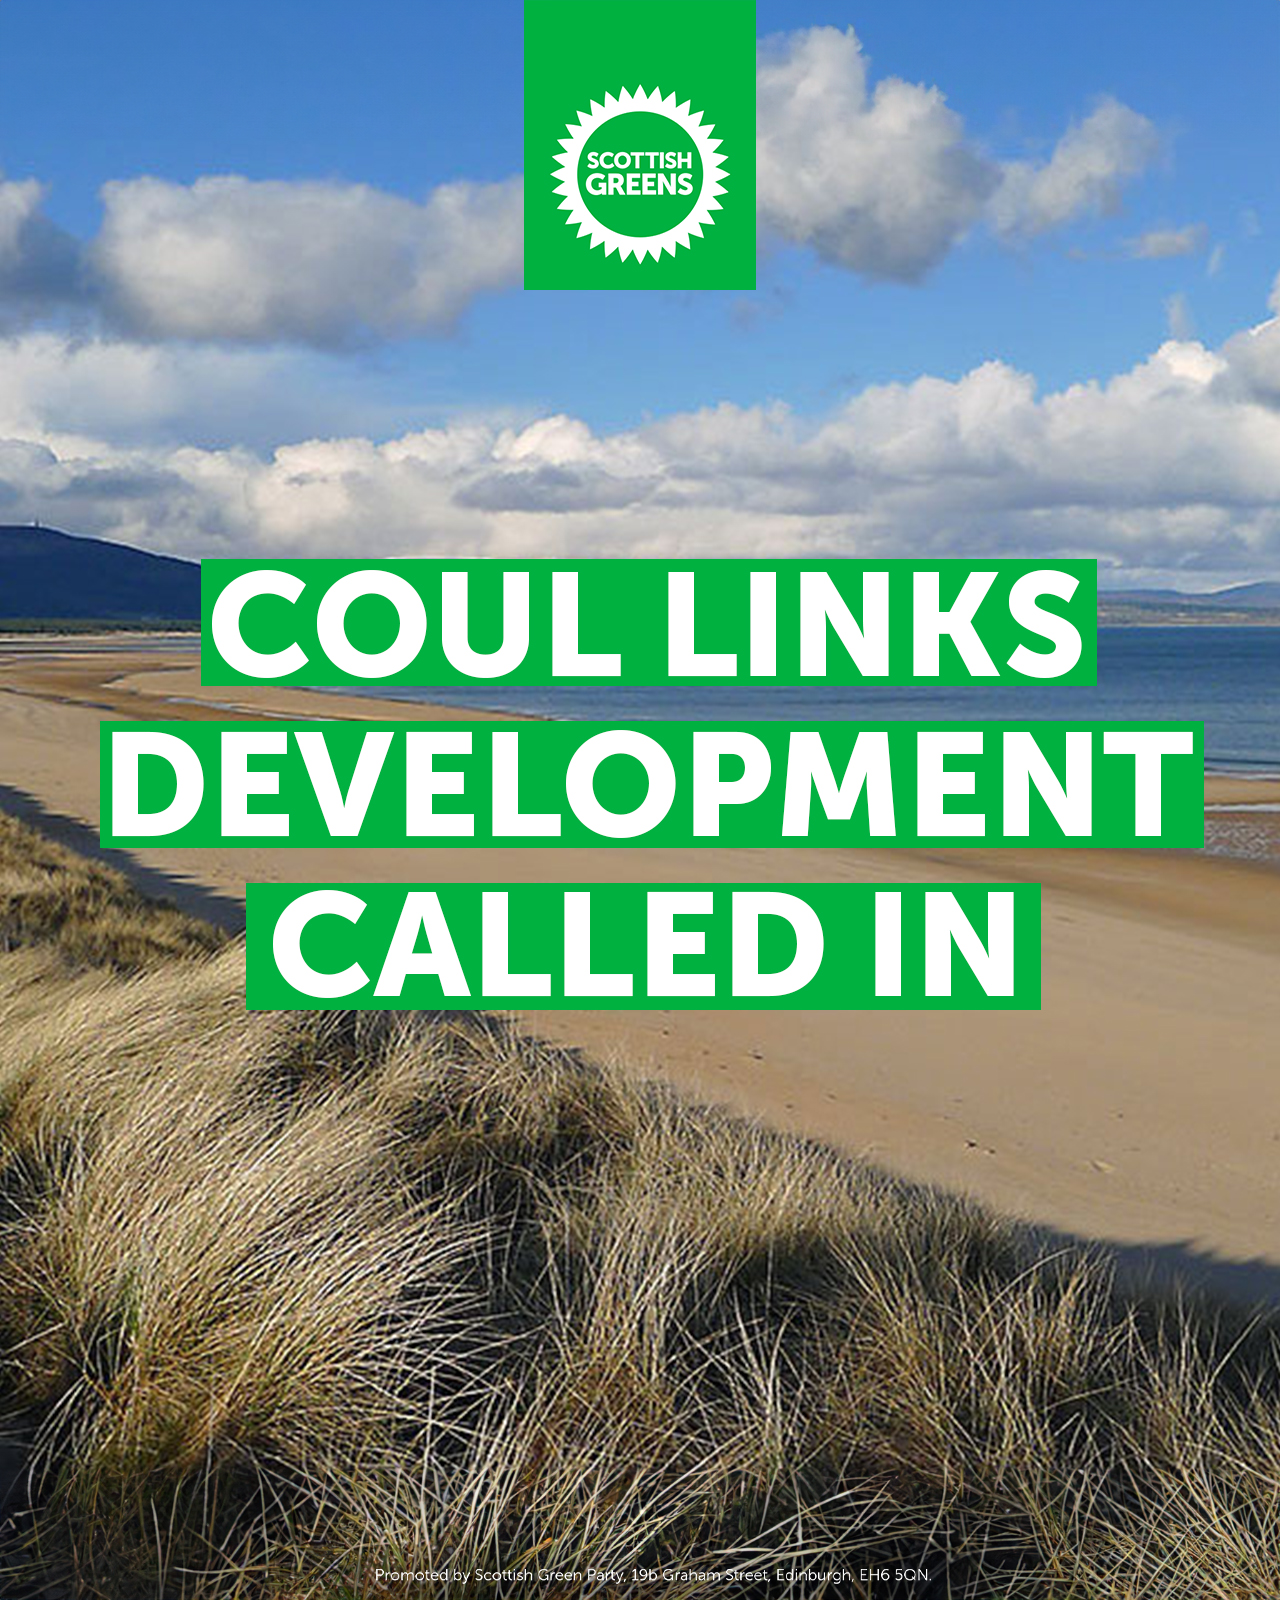 Coul Links Development Called In